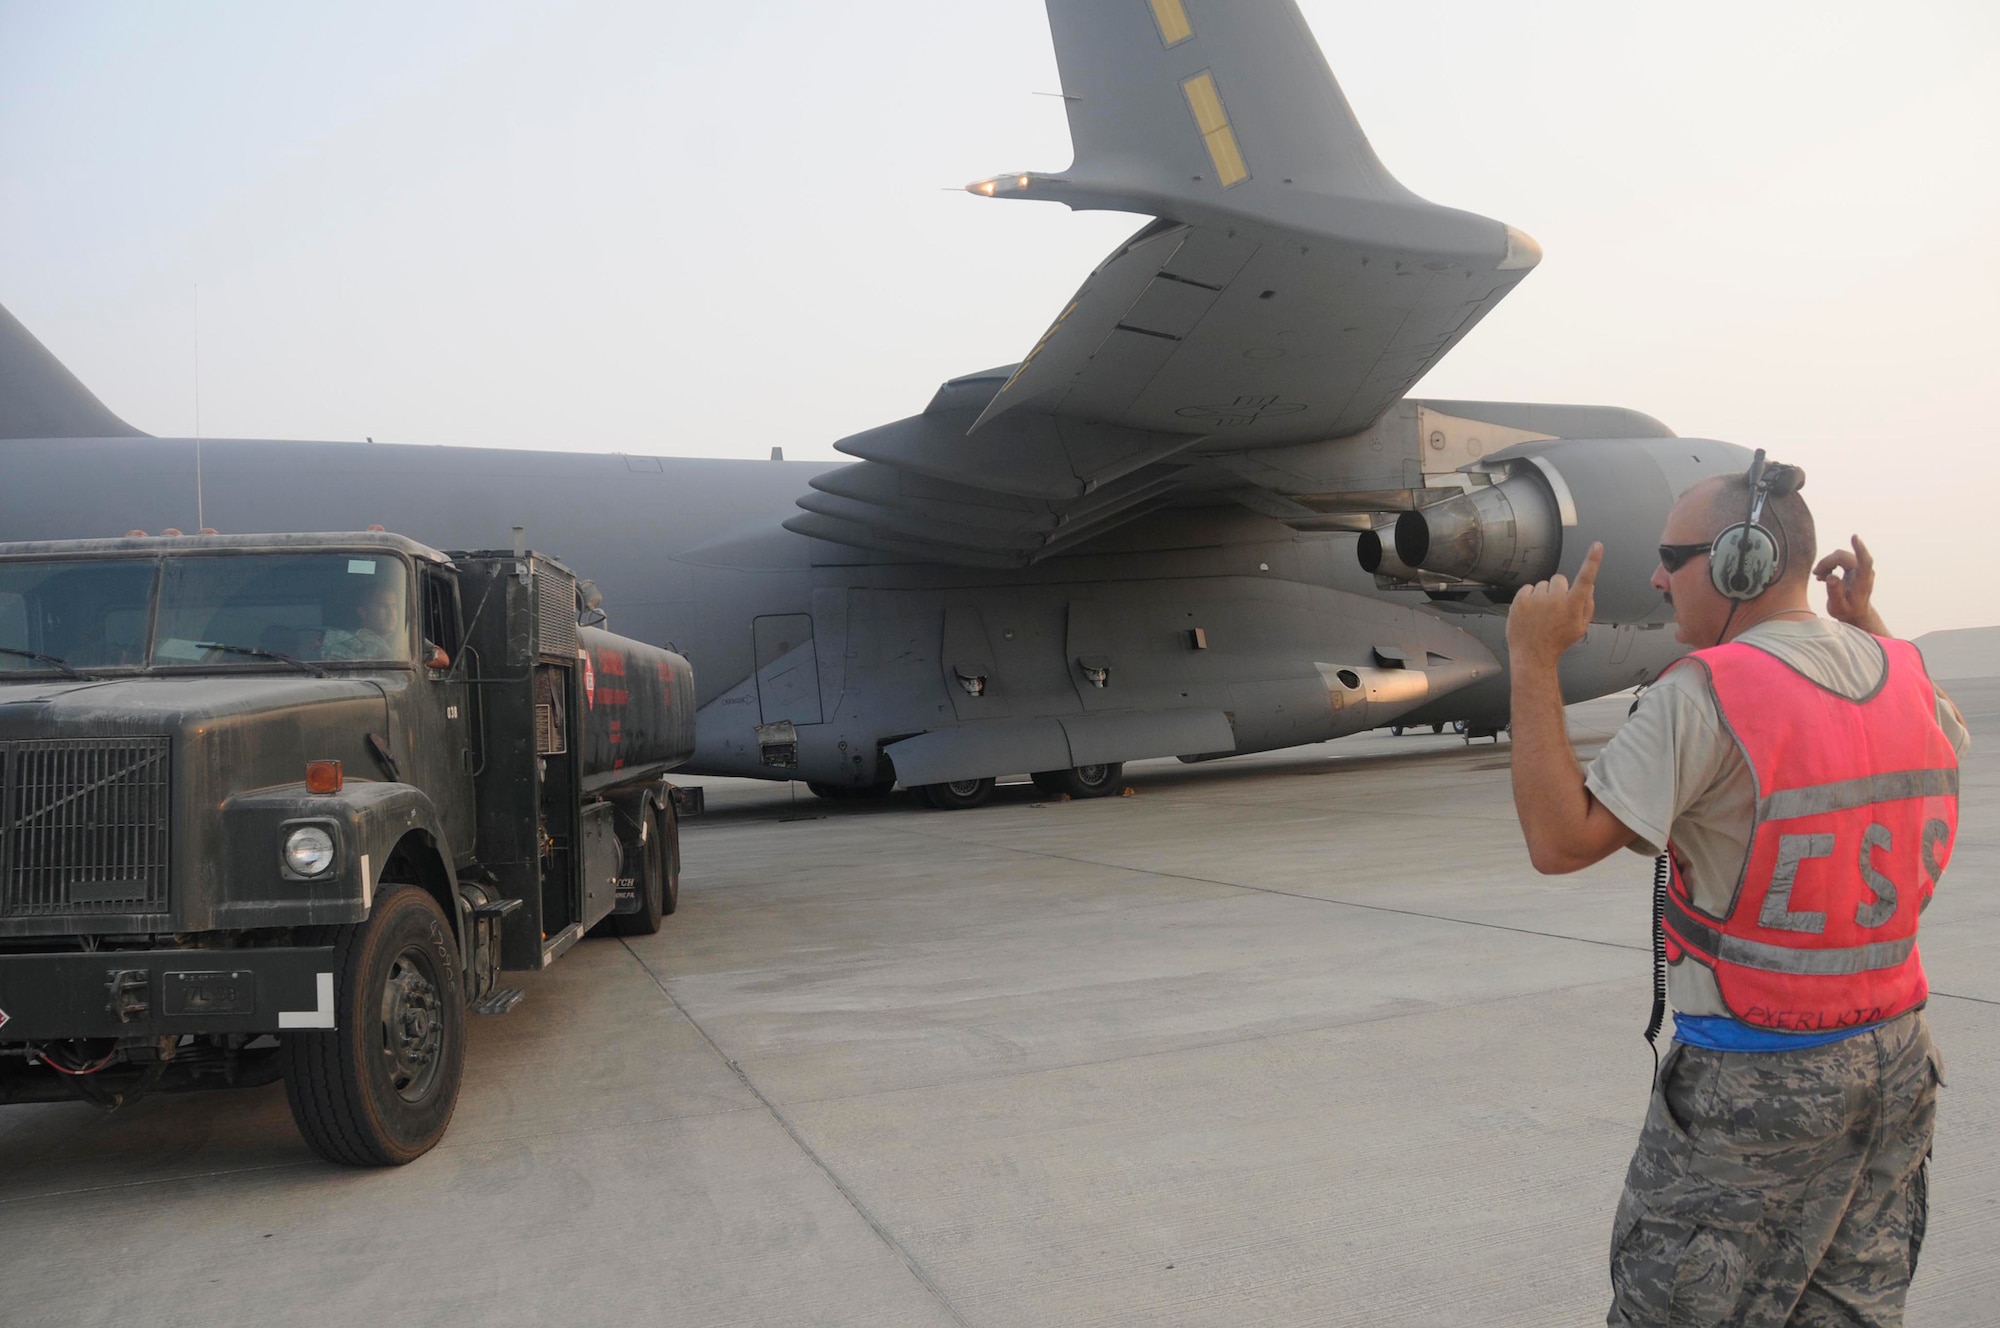 Staff Sgt. Brian Carroll, hydraulics specialist assigned to the 8th Expeditionary Air Mobility Squadron, directs a fuel truck after it finished refueling a C-17 Globemaster III Oct. 17, 2008, at an undisclosed air base in Southwest Asia.  Sergeant Carroll, a native of New Martinsville, W.Va., is deployed from Charleston Air Force Base, S.C., in support of Operations Iraqi and Enduring Freedom and Joint Task Force-Horn of Africa. (U.S. Air Force photo by Staff Sgt. Darnell T. Cannady/Released)